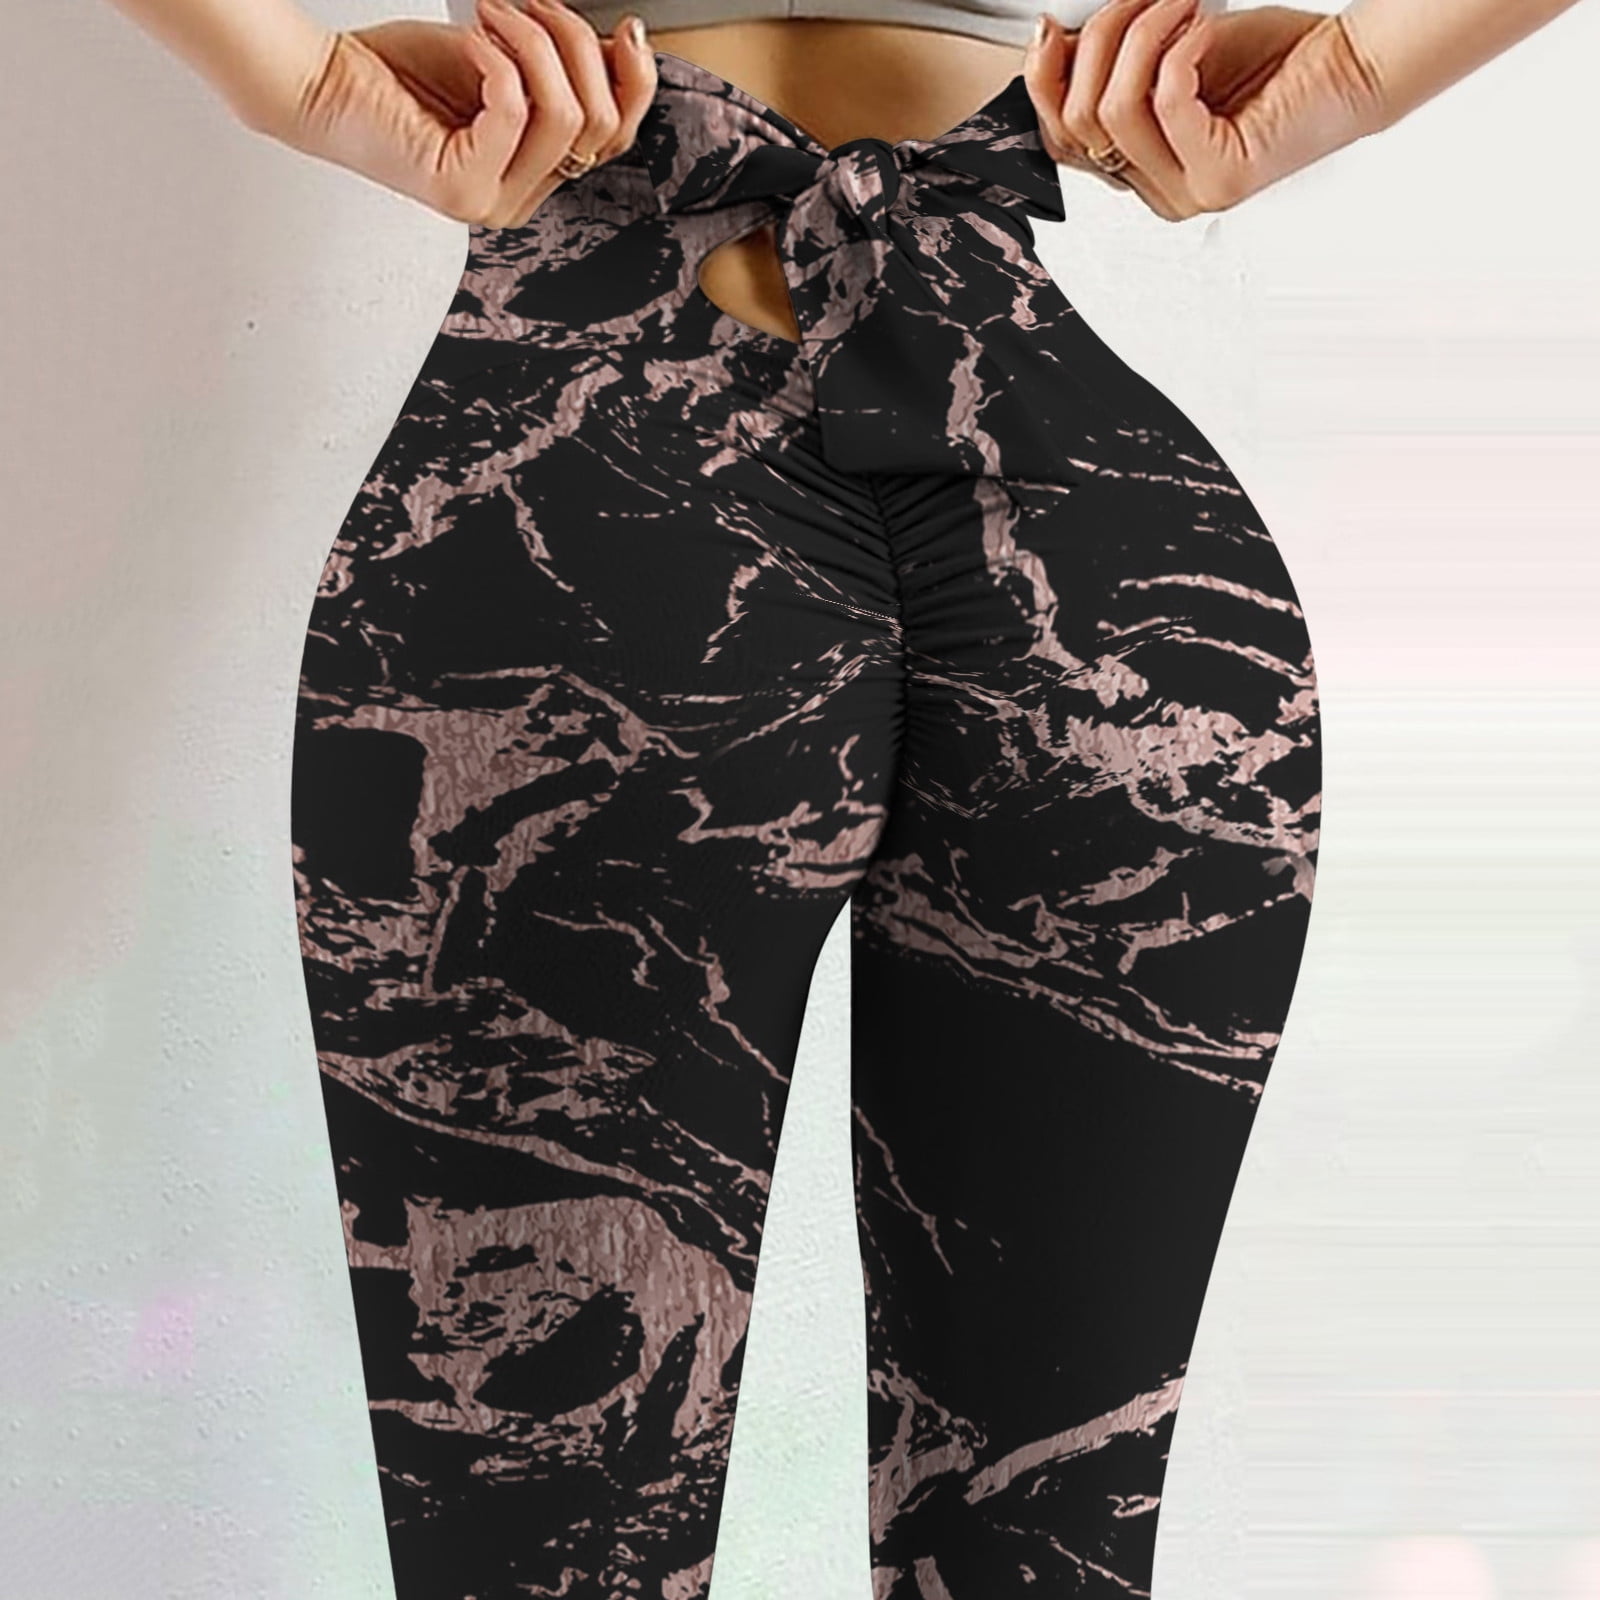 Kayannuo Yoga Pants with Pockets for Women Back to School Clearance Fashion  Women High Waist Printed Tight Fitness Yoga Pants Nude Hidden Yoga Pants  Orange 